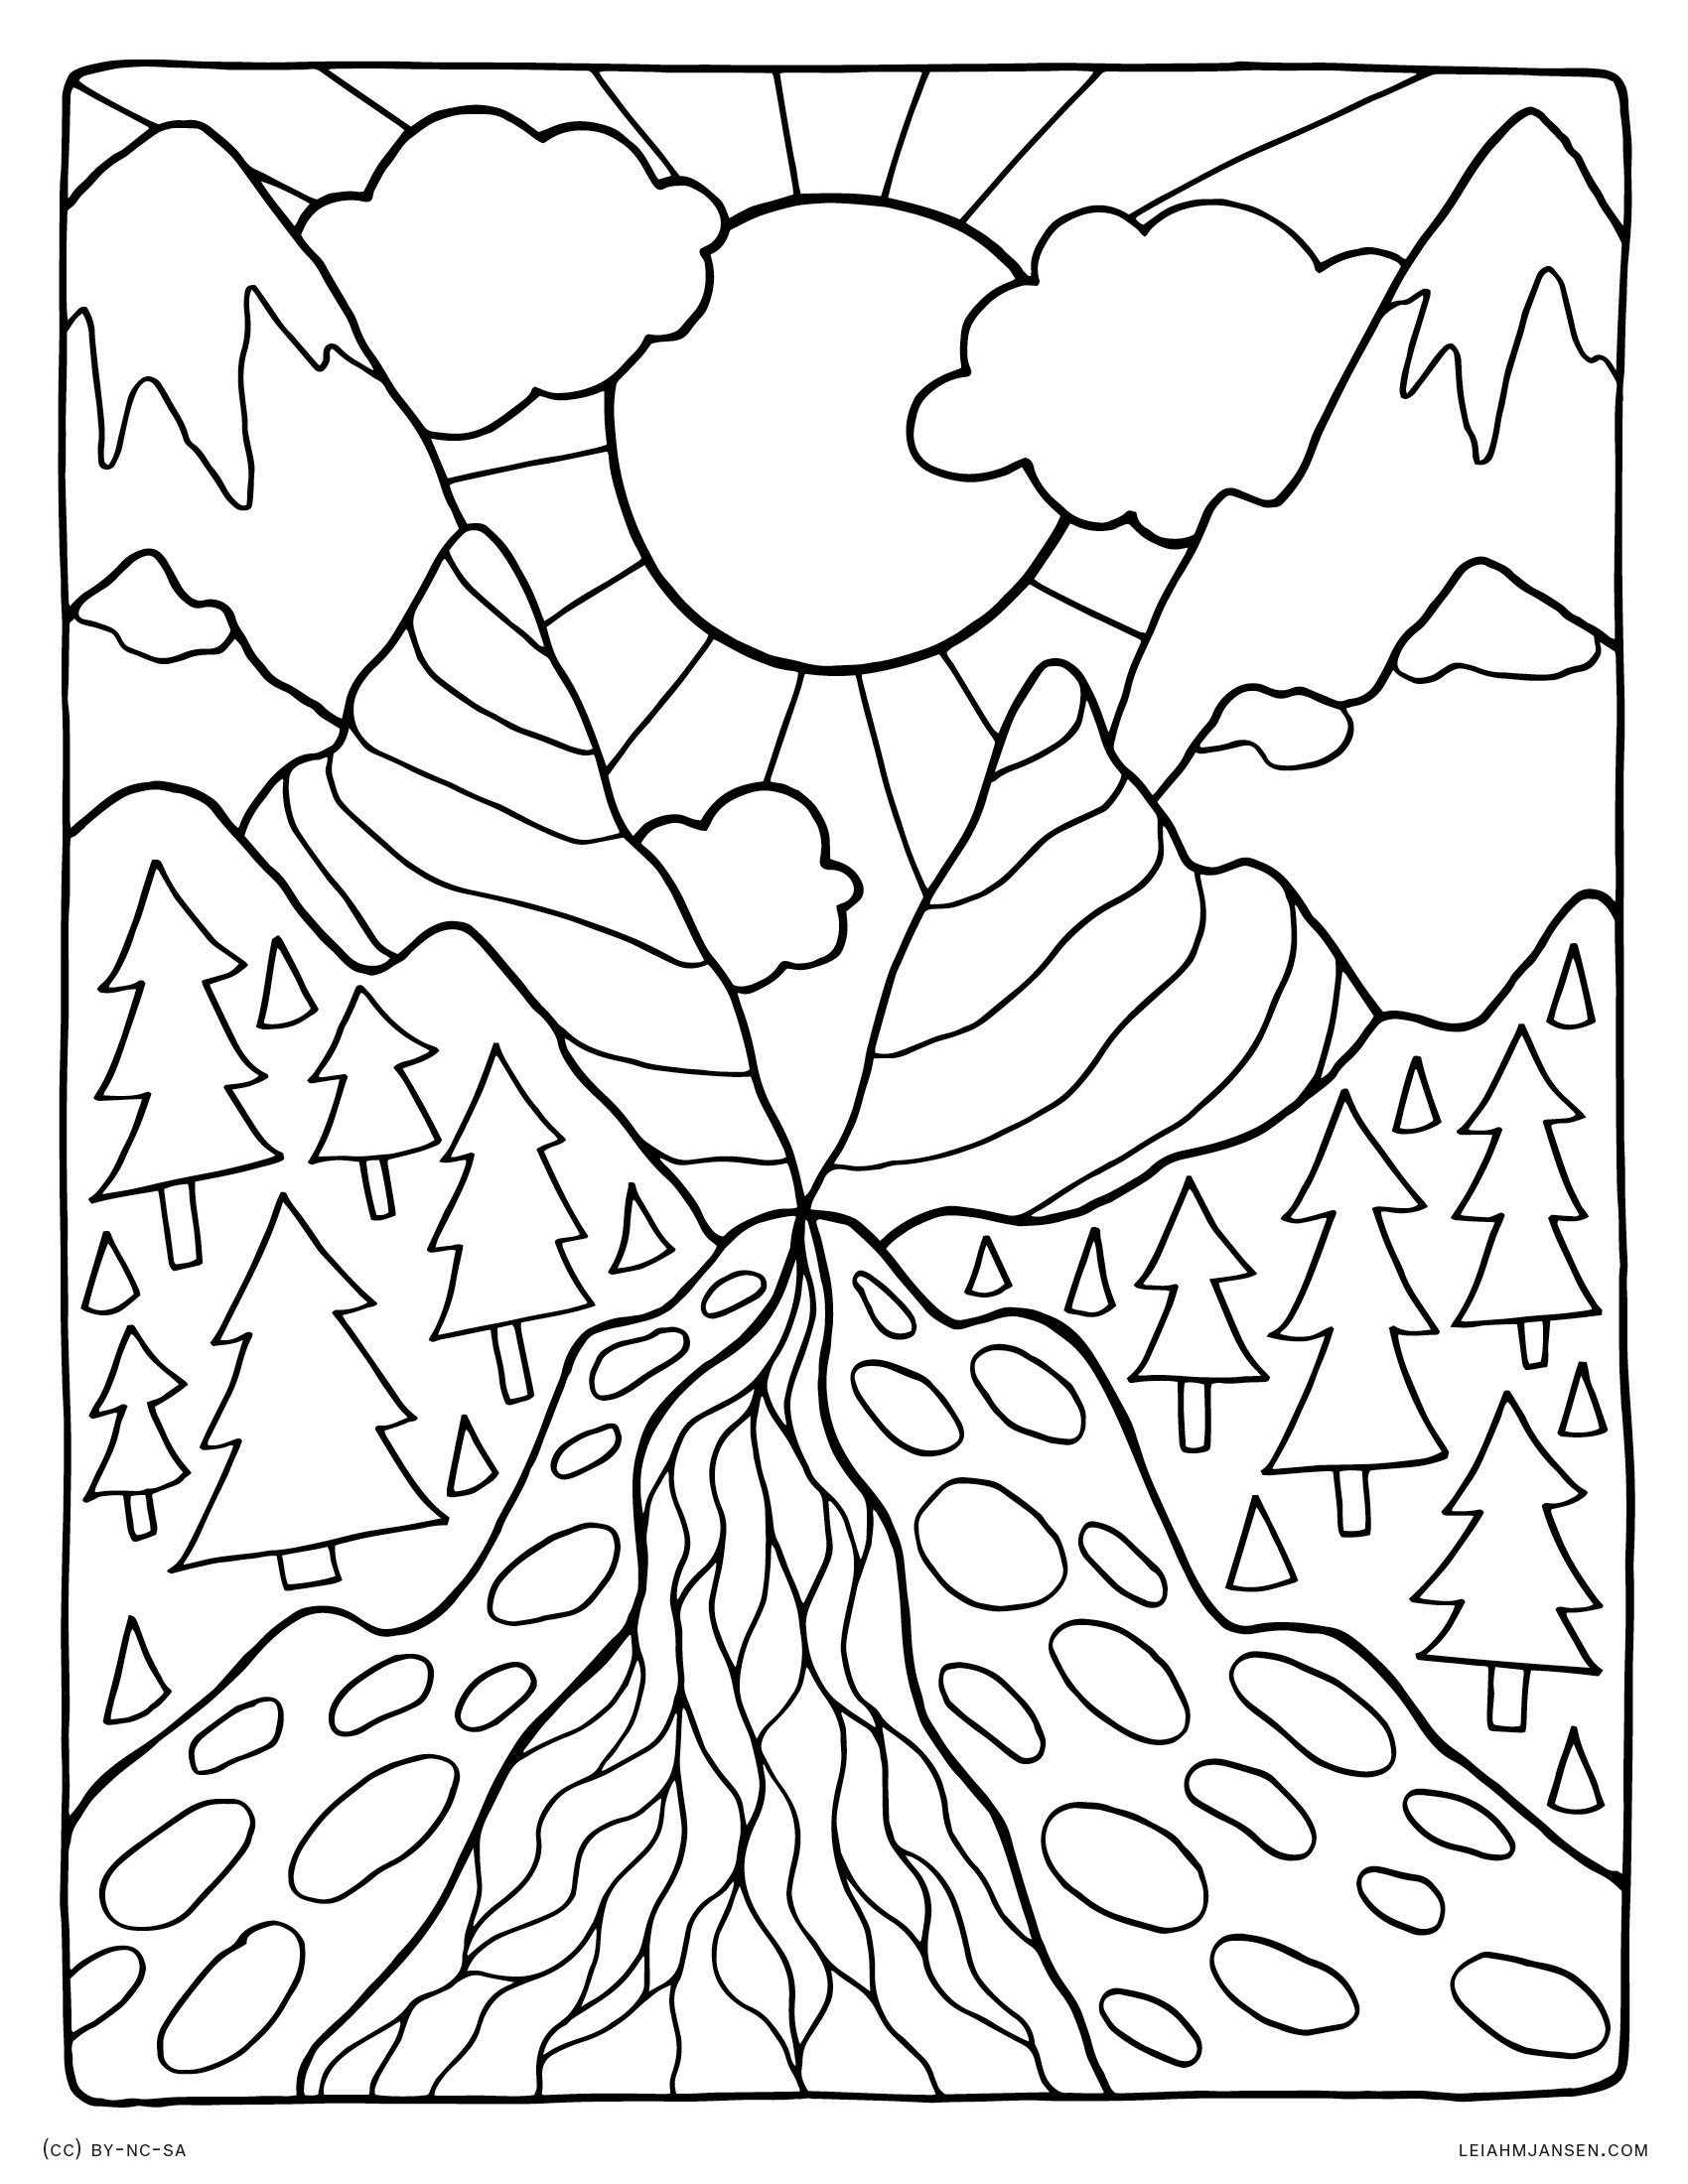 Detailed Landscape Coloring Pages For Adults at Free